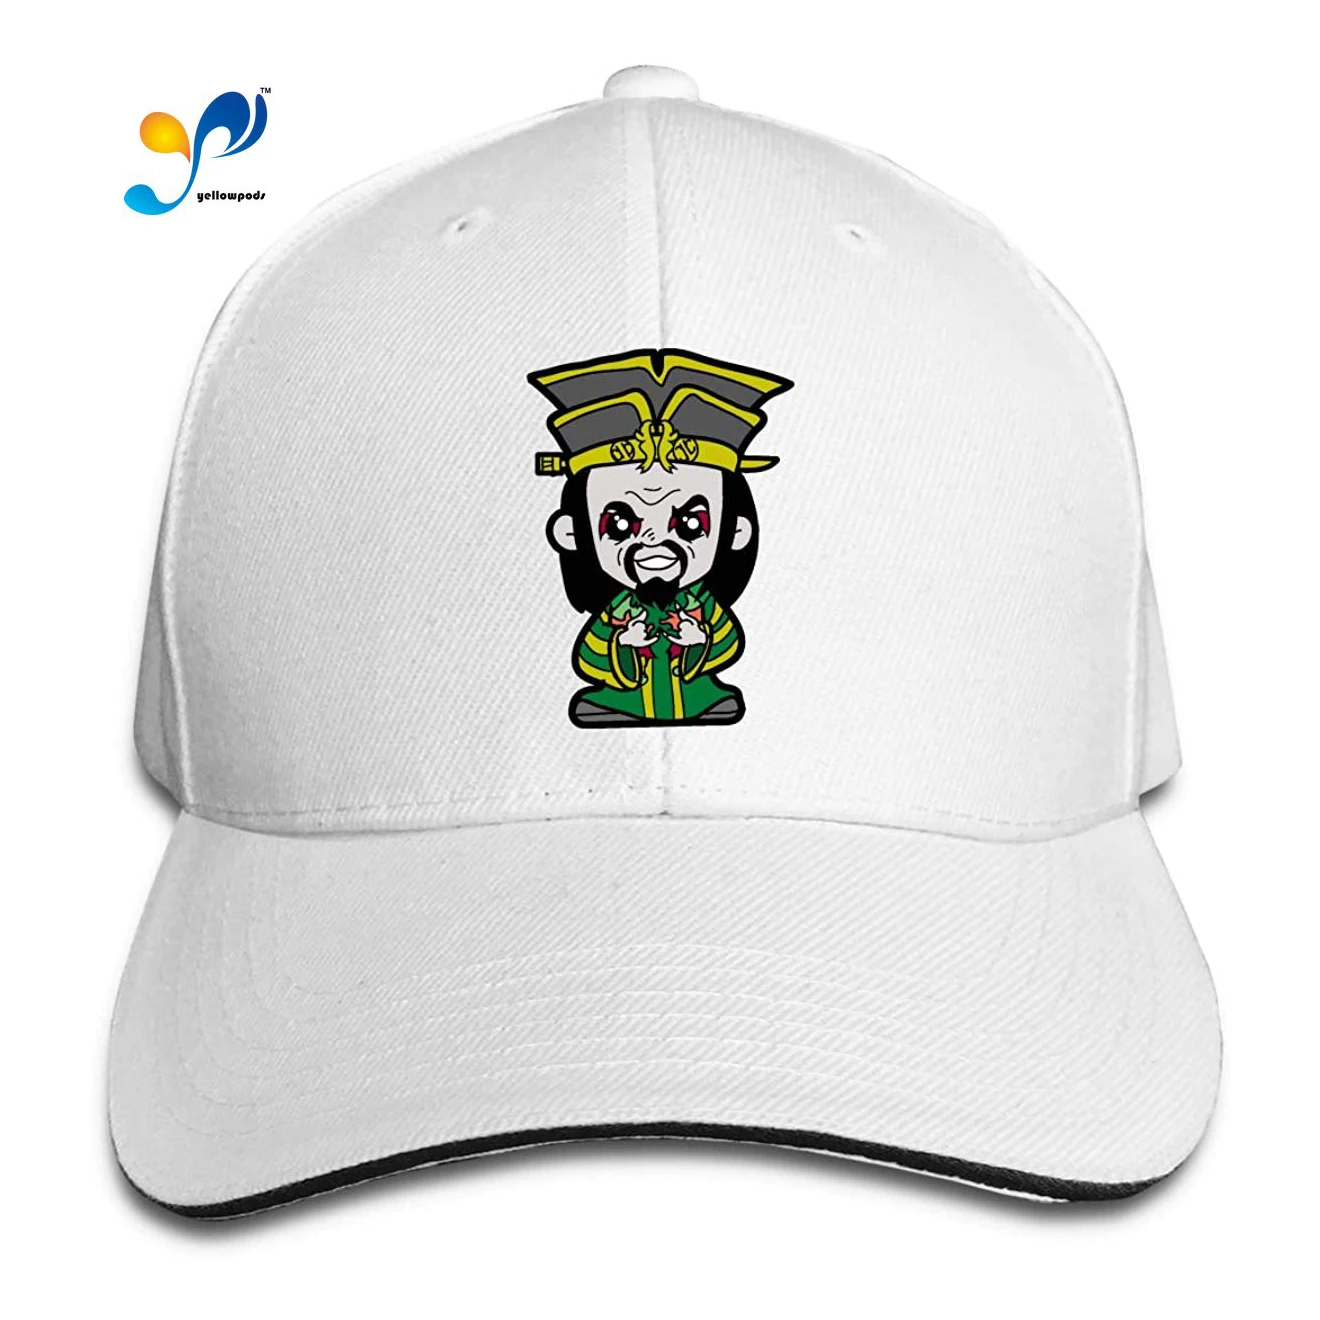 

Moto Gp Baseball Cap Lil Lo Pan Indeed Big Trouble In Little China Women Man's Classic Pointed Cap Cap